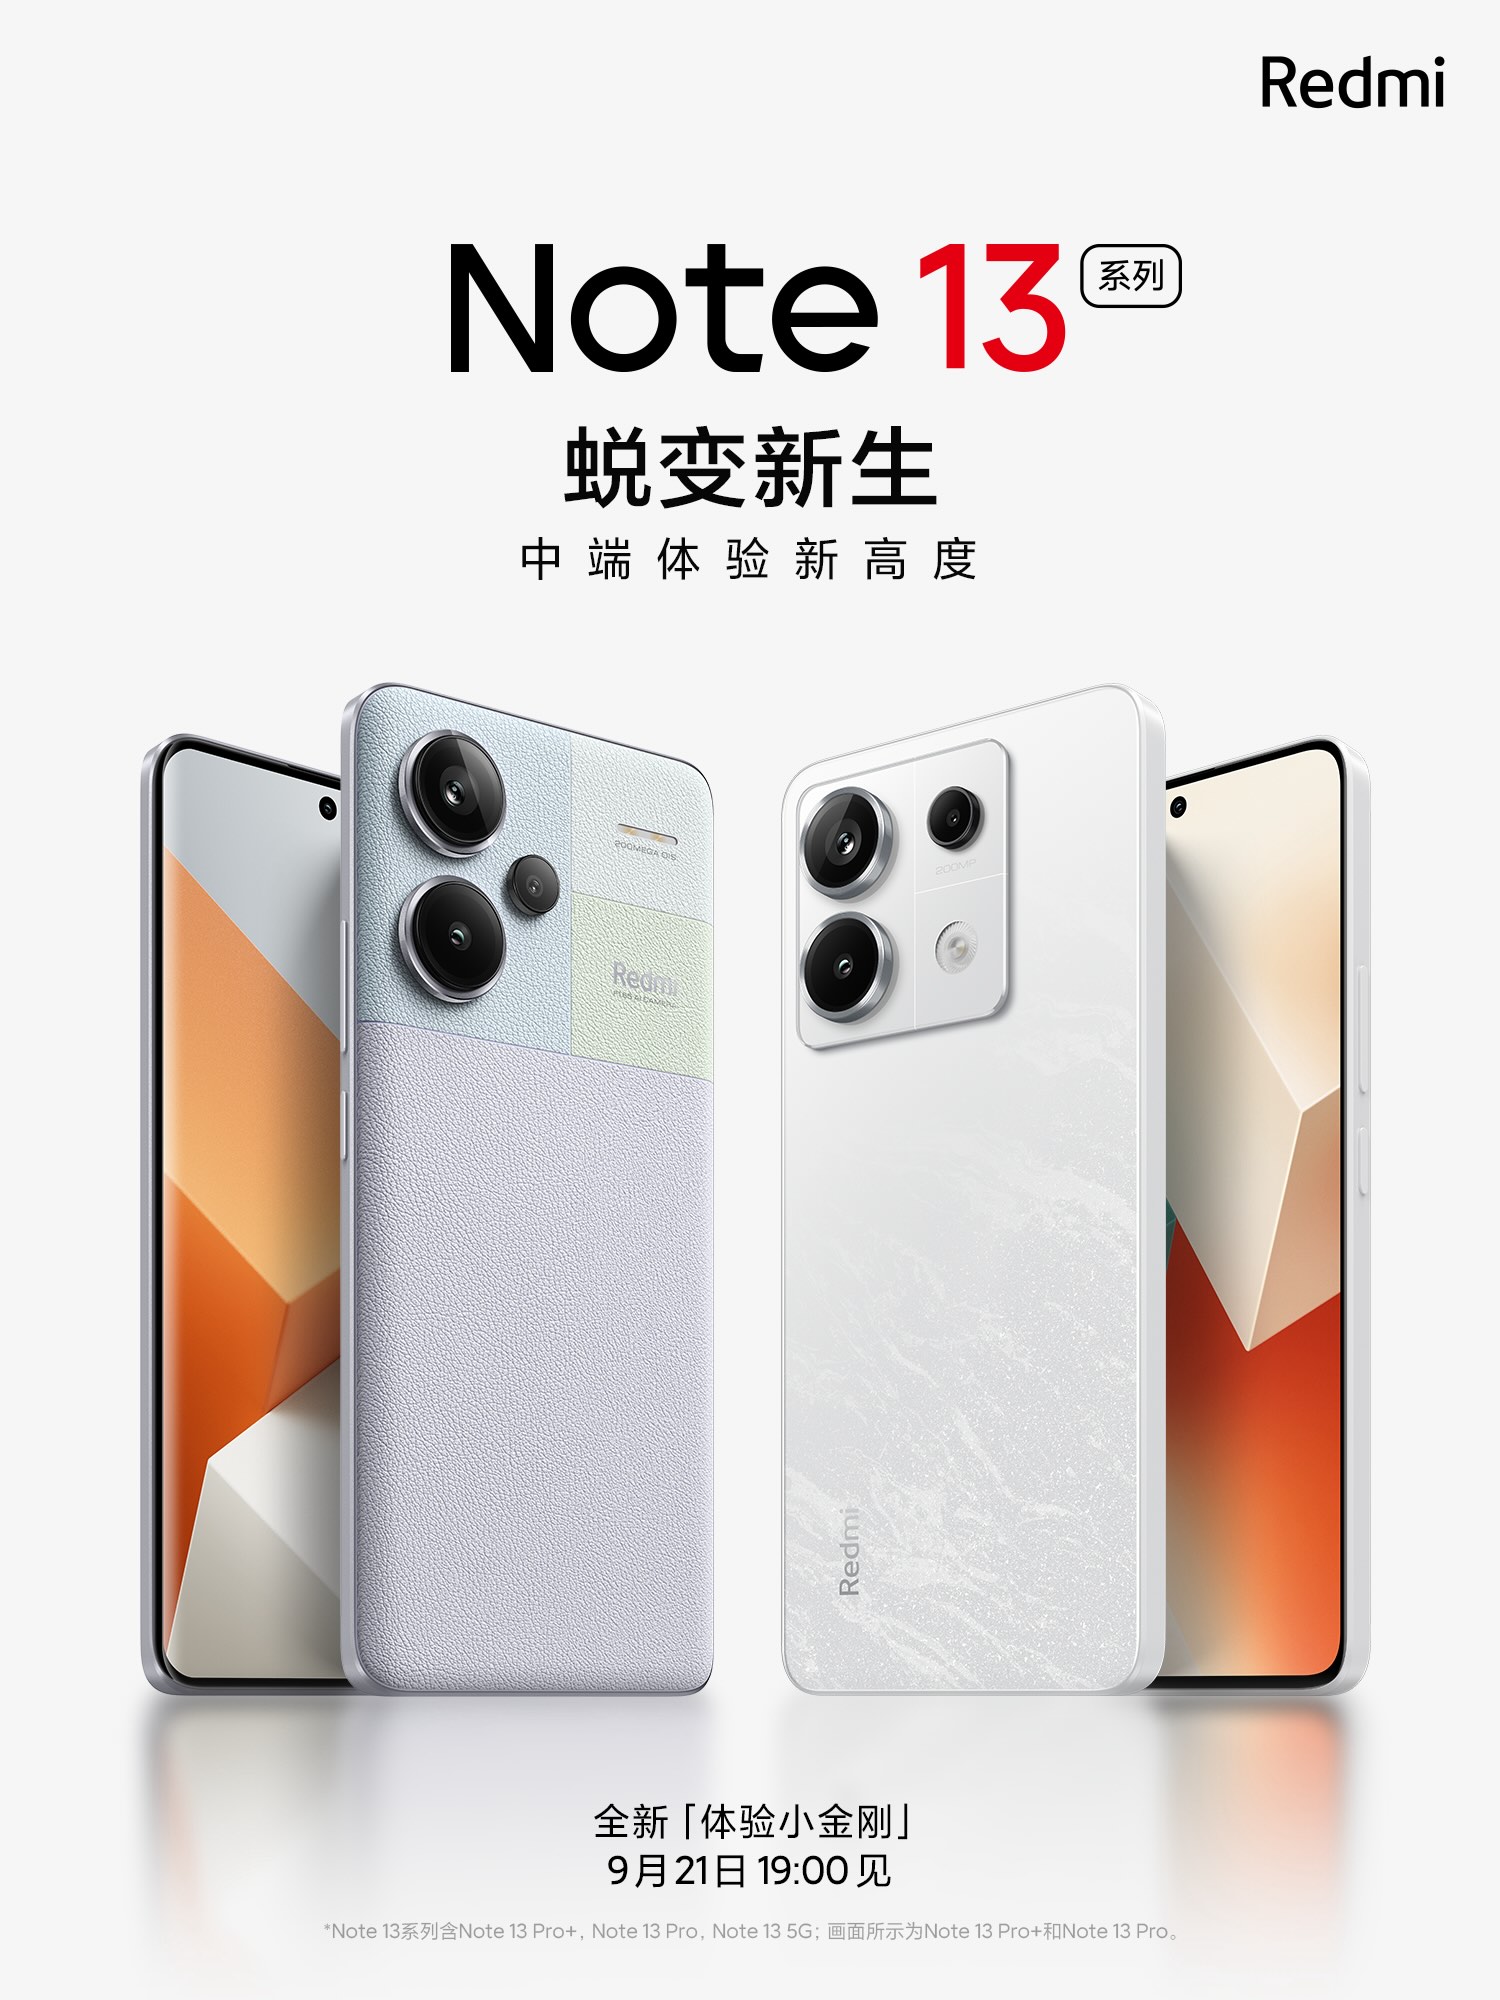 Redmi Note 13 Pro Series to Launch on September 21